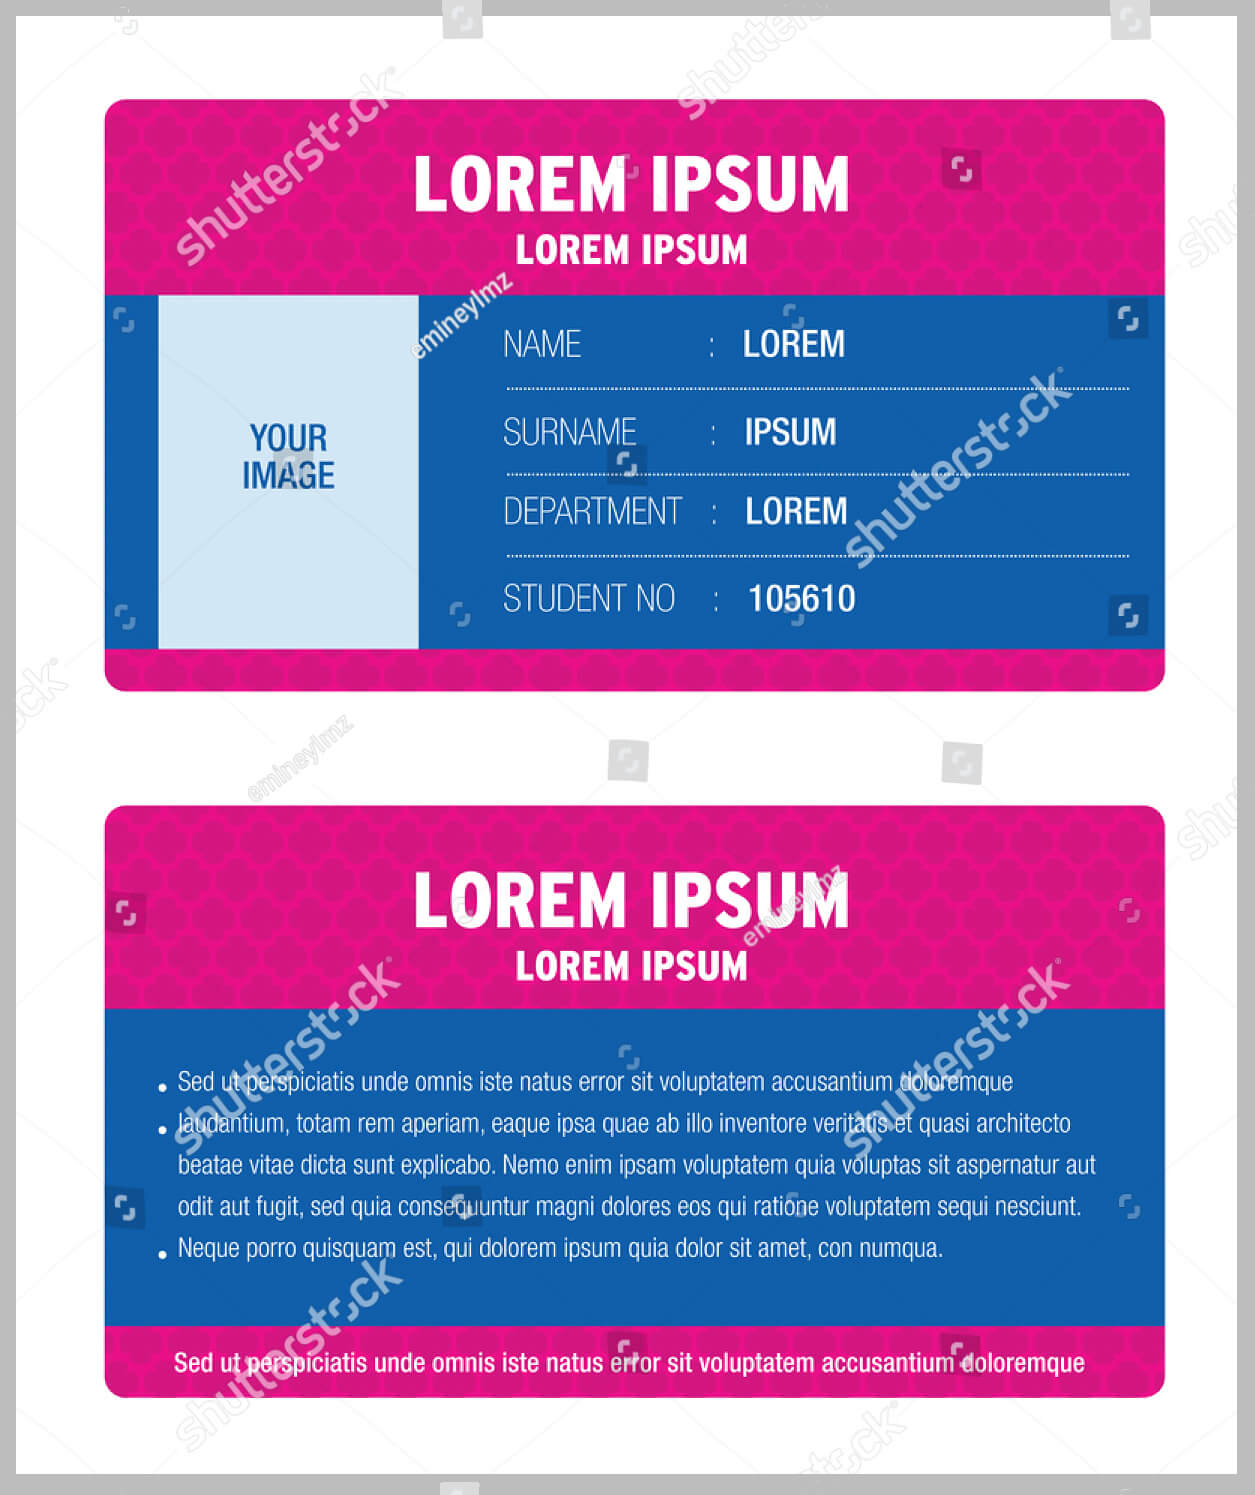 11+ Iconic Student Card Templates – Ai, Psd, Word | Free Regarding Isic Card Template